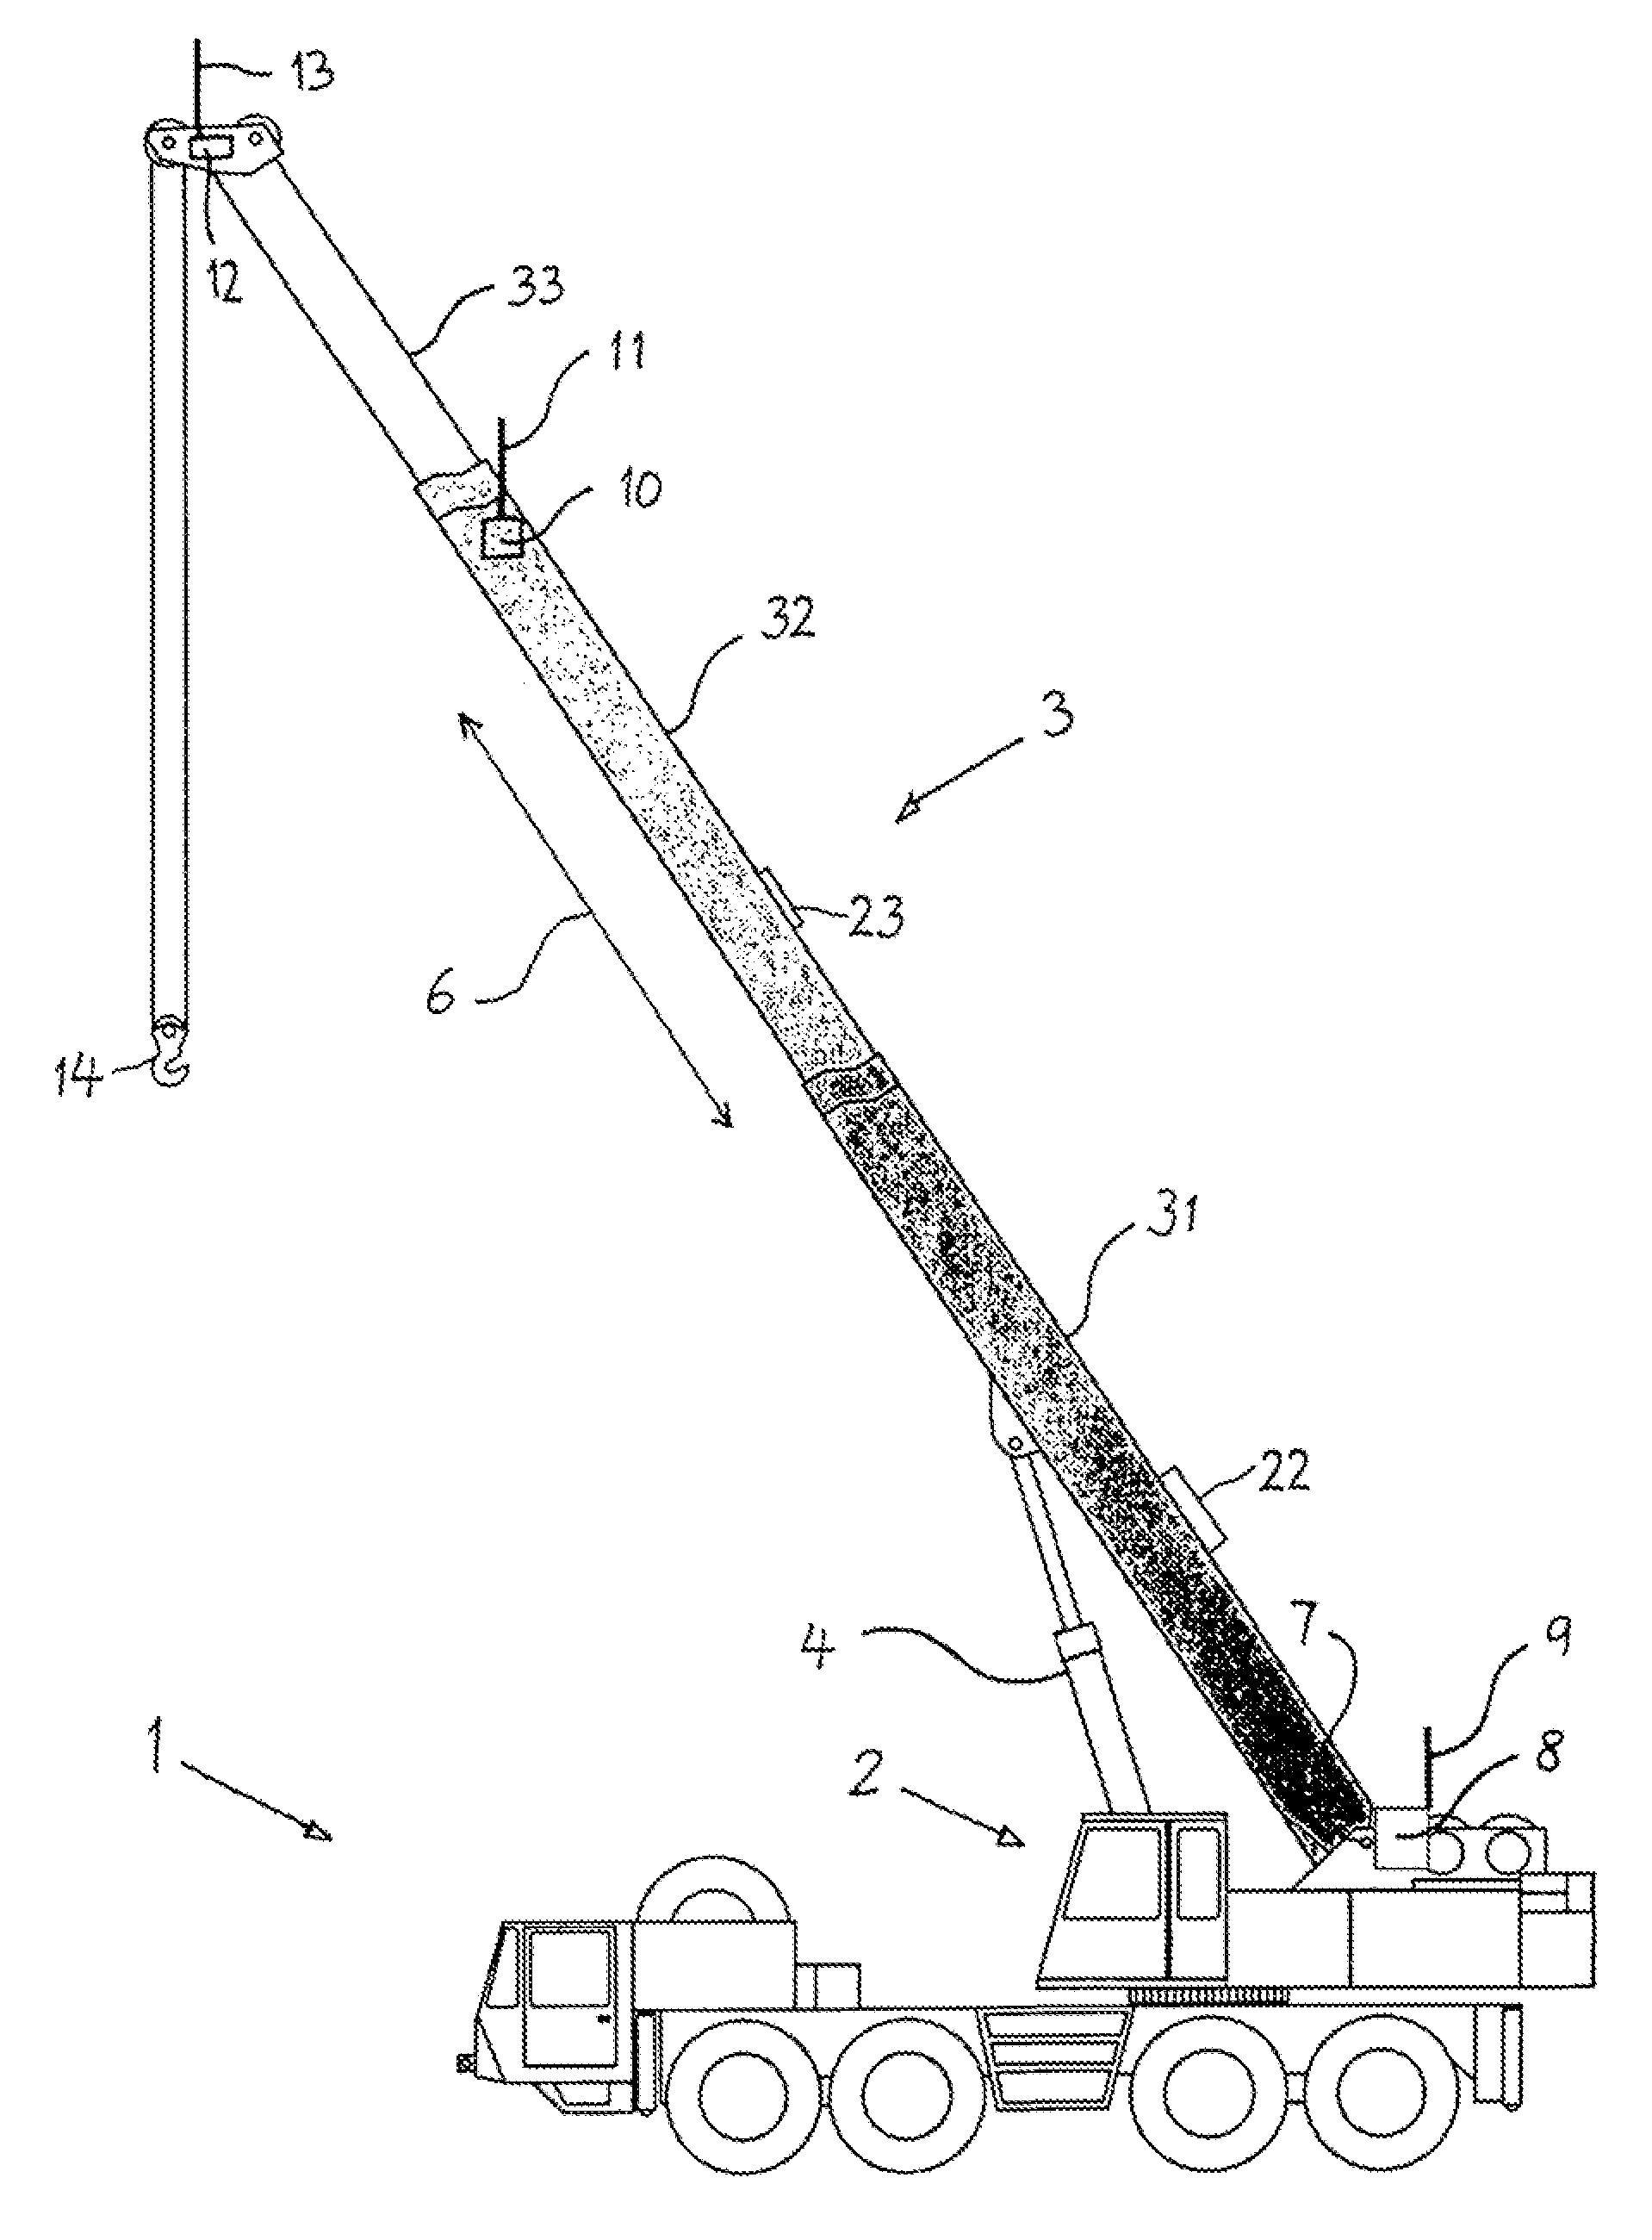 Mobile or stationary working apparatus with telescopic extension arm elements whose position in relation to one another is detected by RFID technology